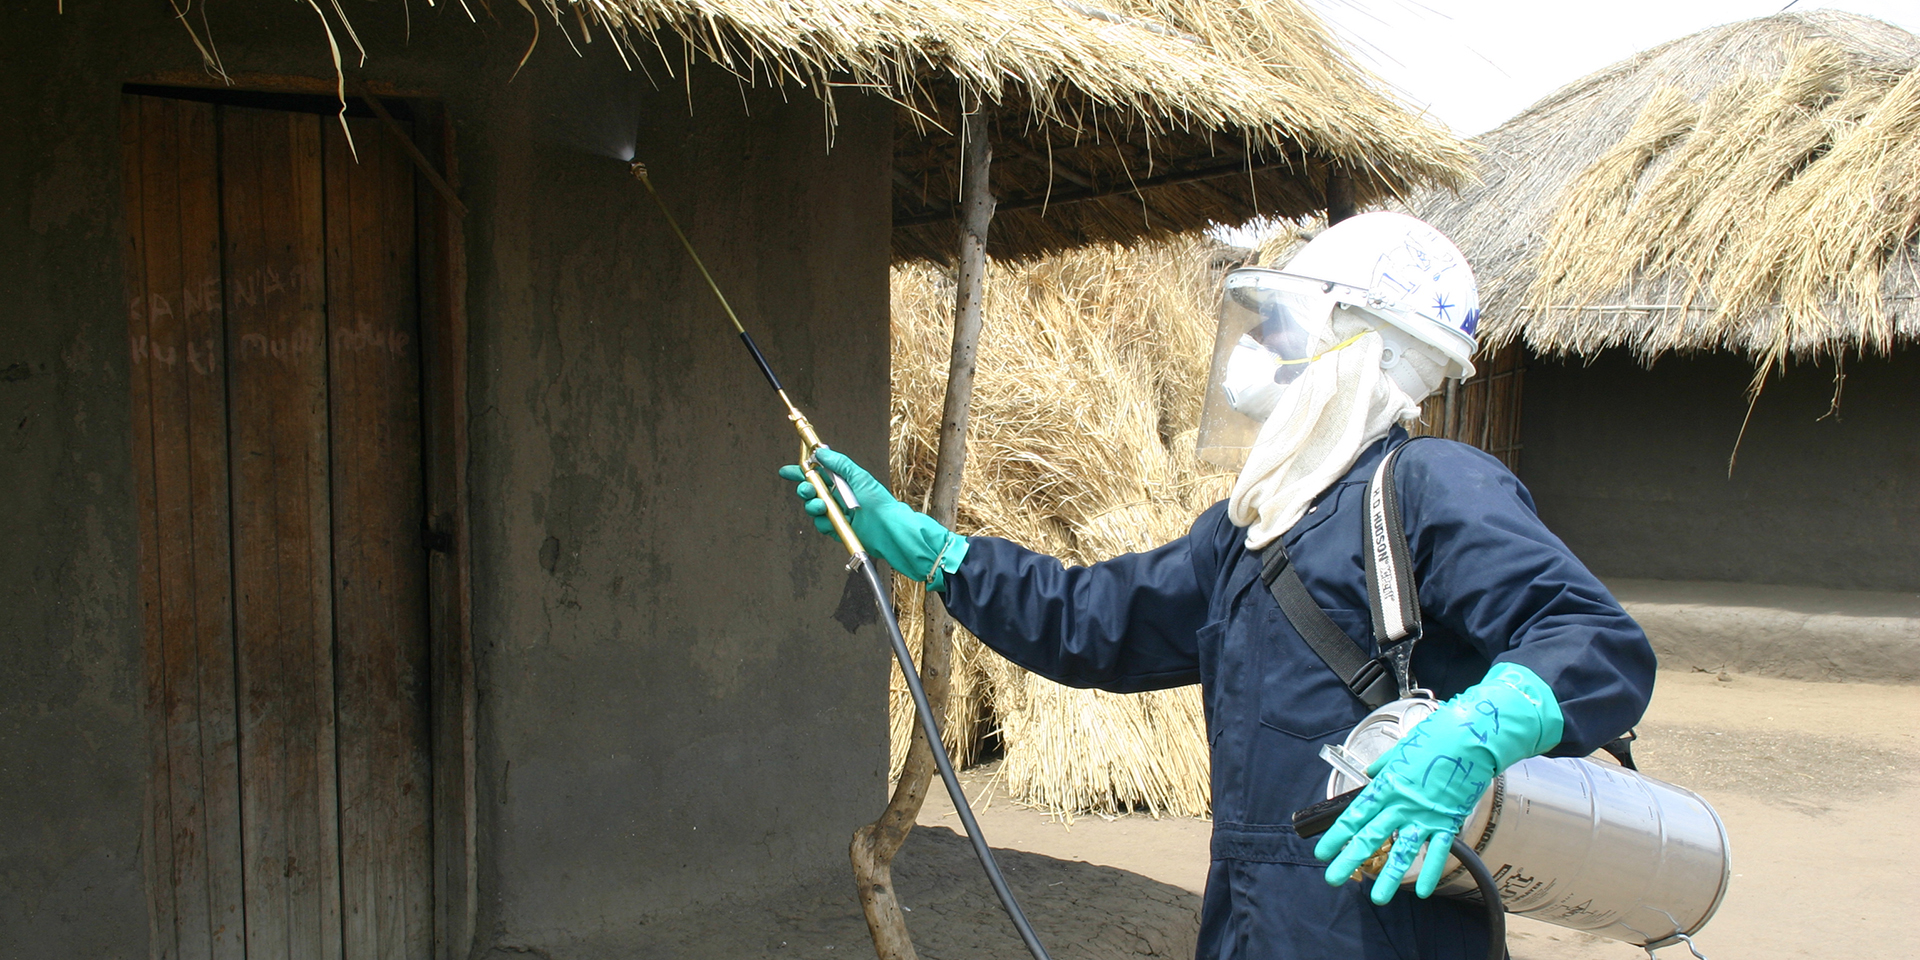 Image of a man wearing protective equipment spraying pesticides on a hut.